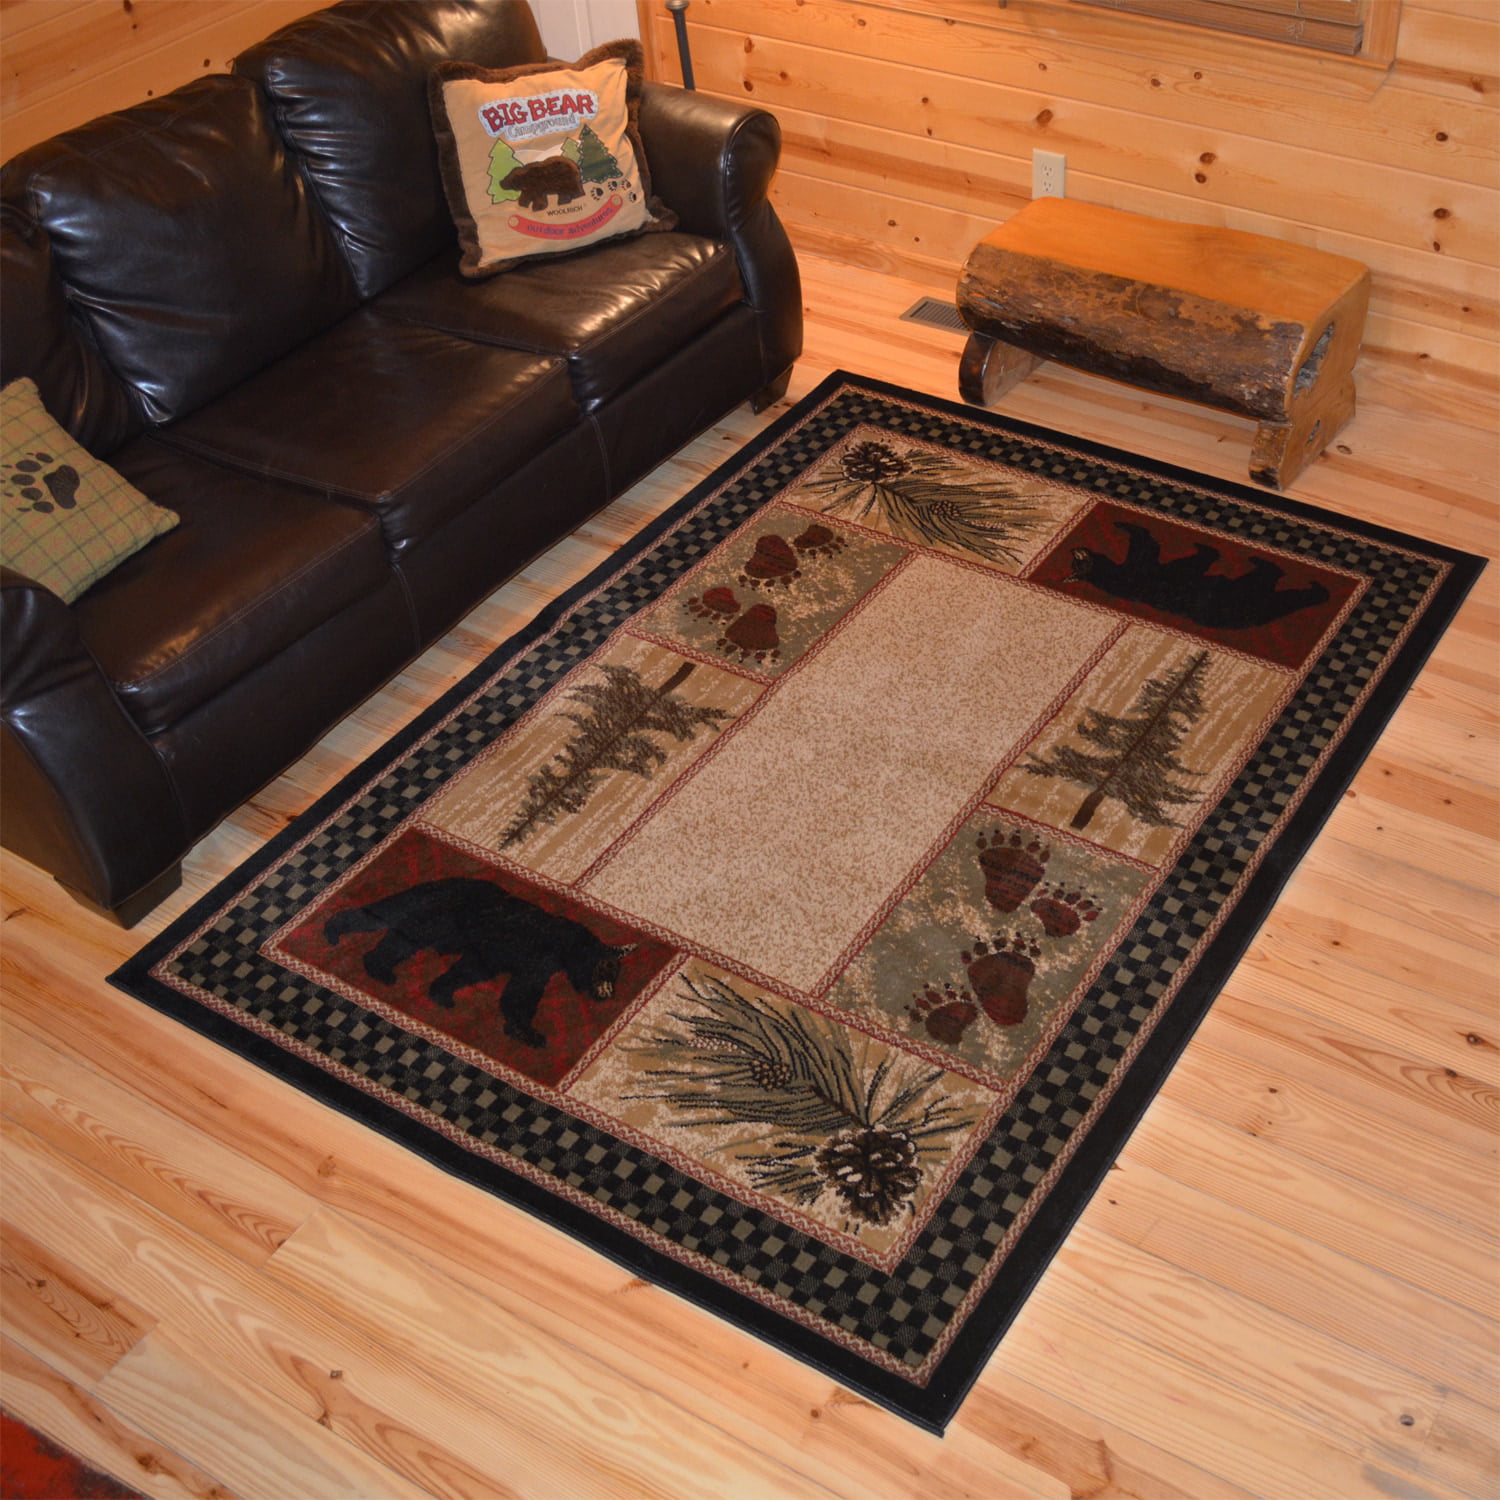 Details about   Rustic Lodge Bear Moose Deer Panel 5x8 Red Area Rug 5'3"x7'7" 6913 